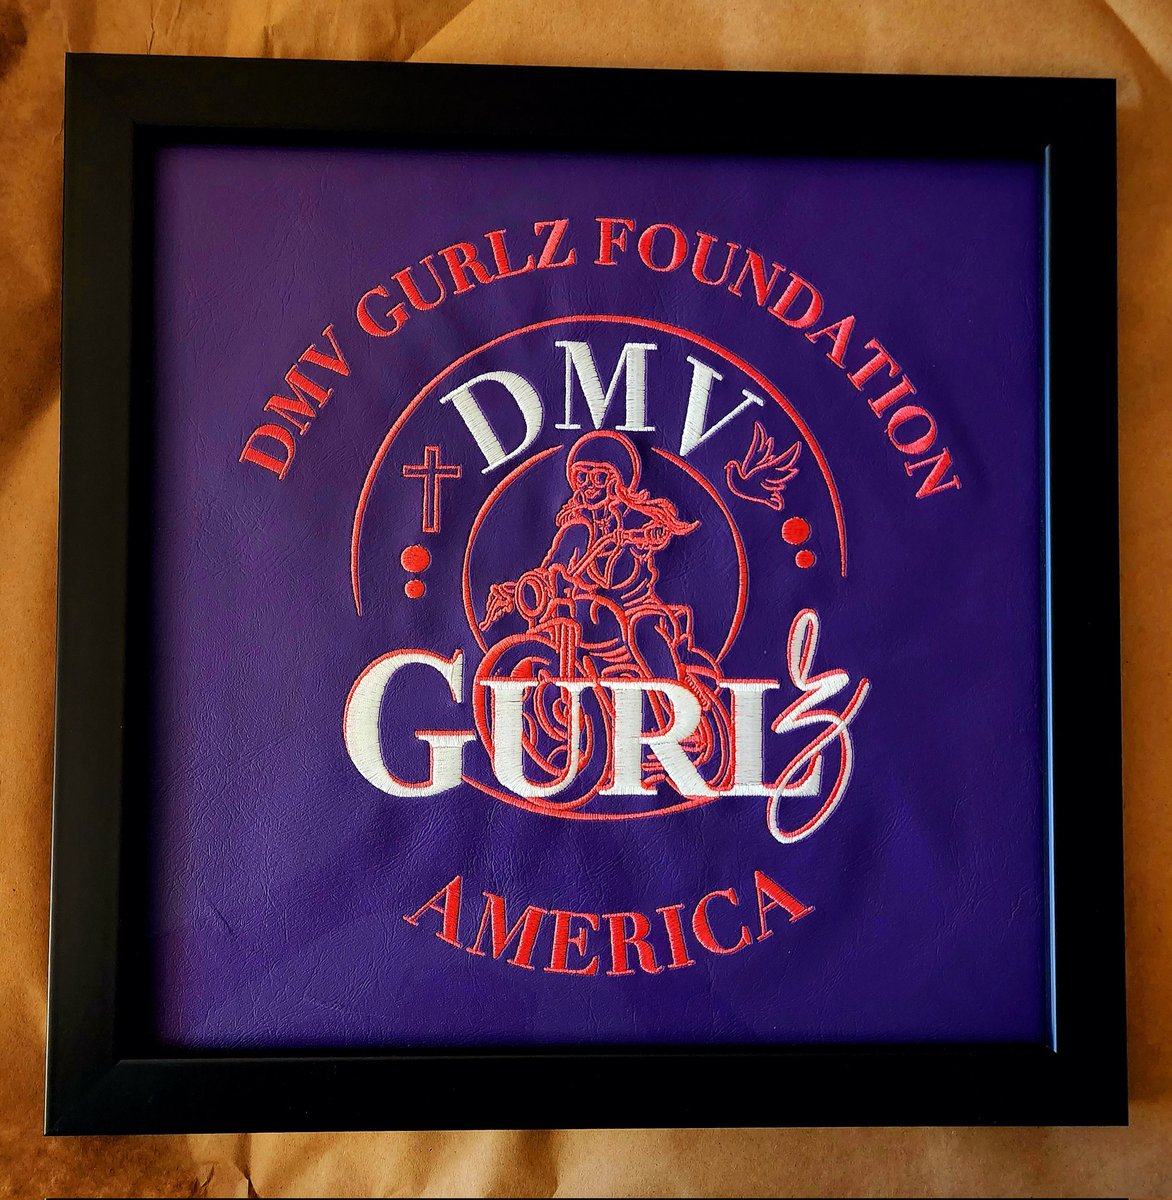 It has been an incredible 7-days. Framing our first logo stitch was very humbling. The DMV Girls Foundation is very excited about our upcoming events. 💜💜💜 Stay Tuned 💜💜. #dmvgurlz